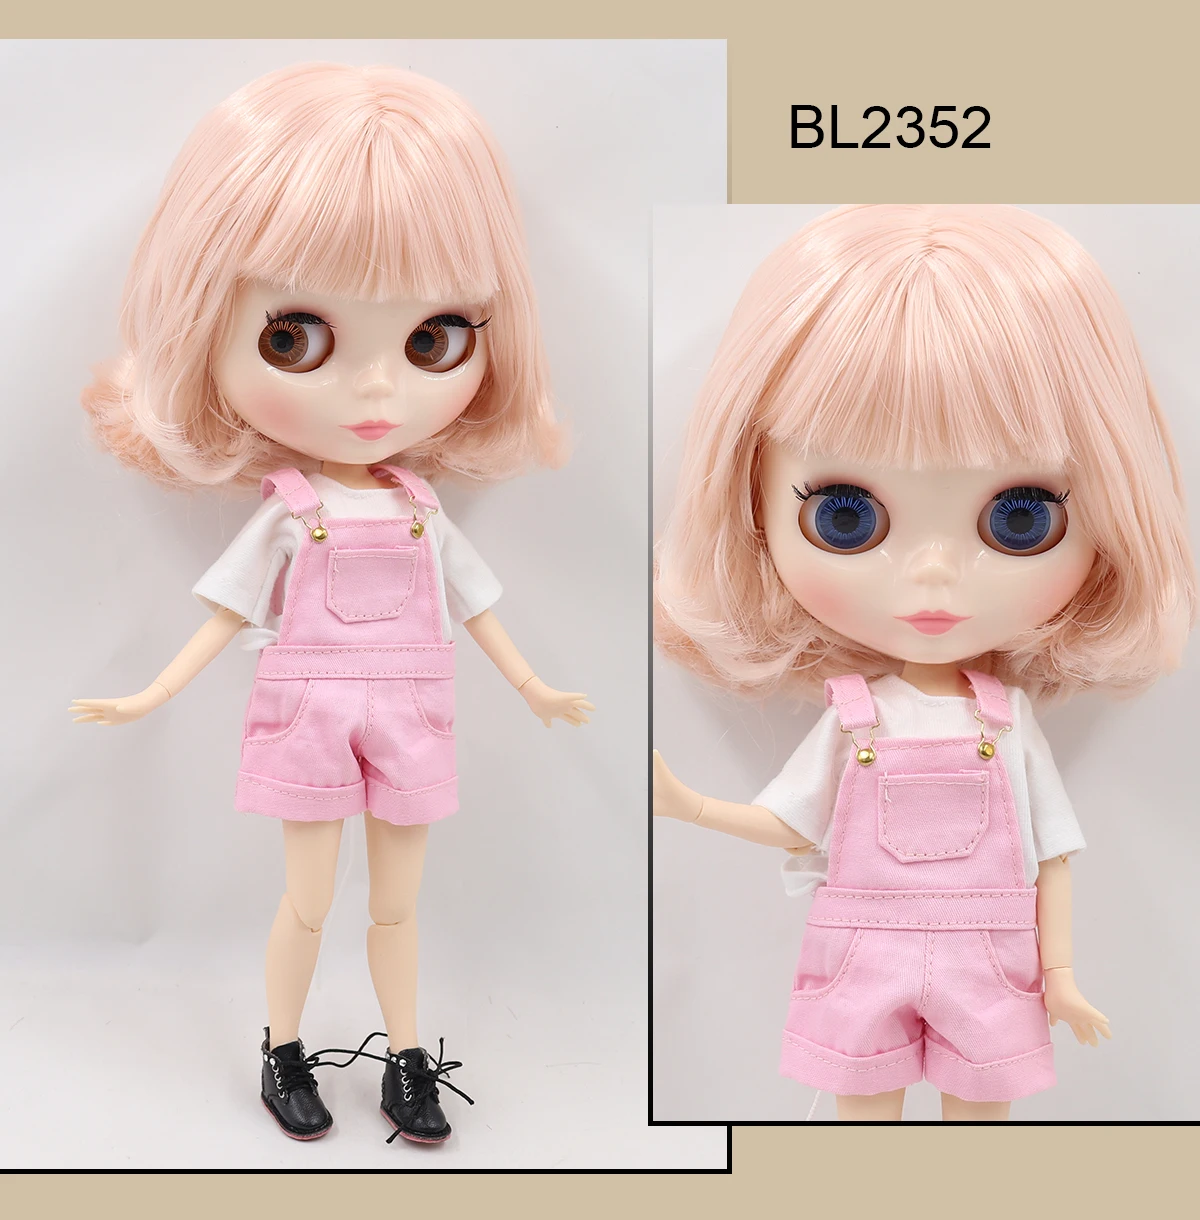 Neo Blythe Doll with Pink Hair, White Skin, Shiny Cute Face & Custom Jointed Body 1